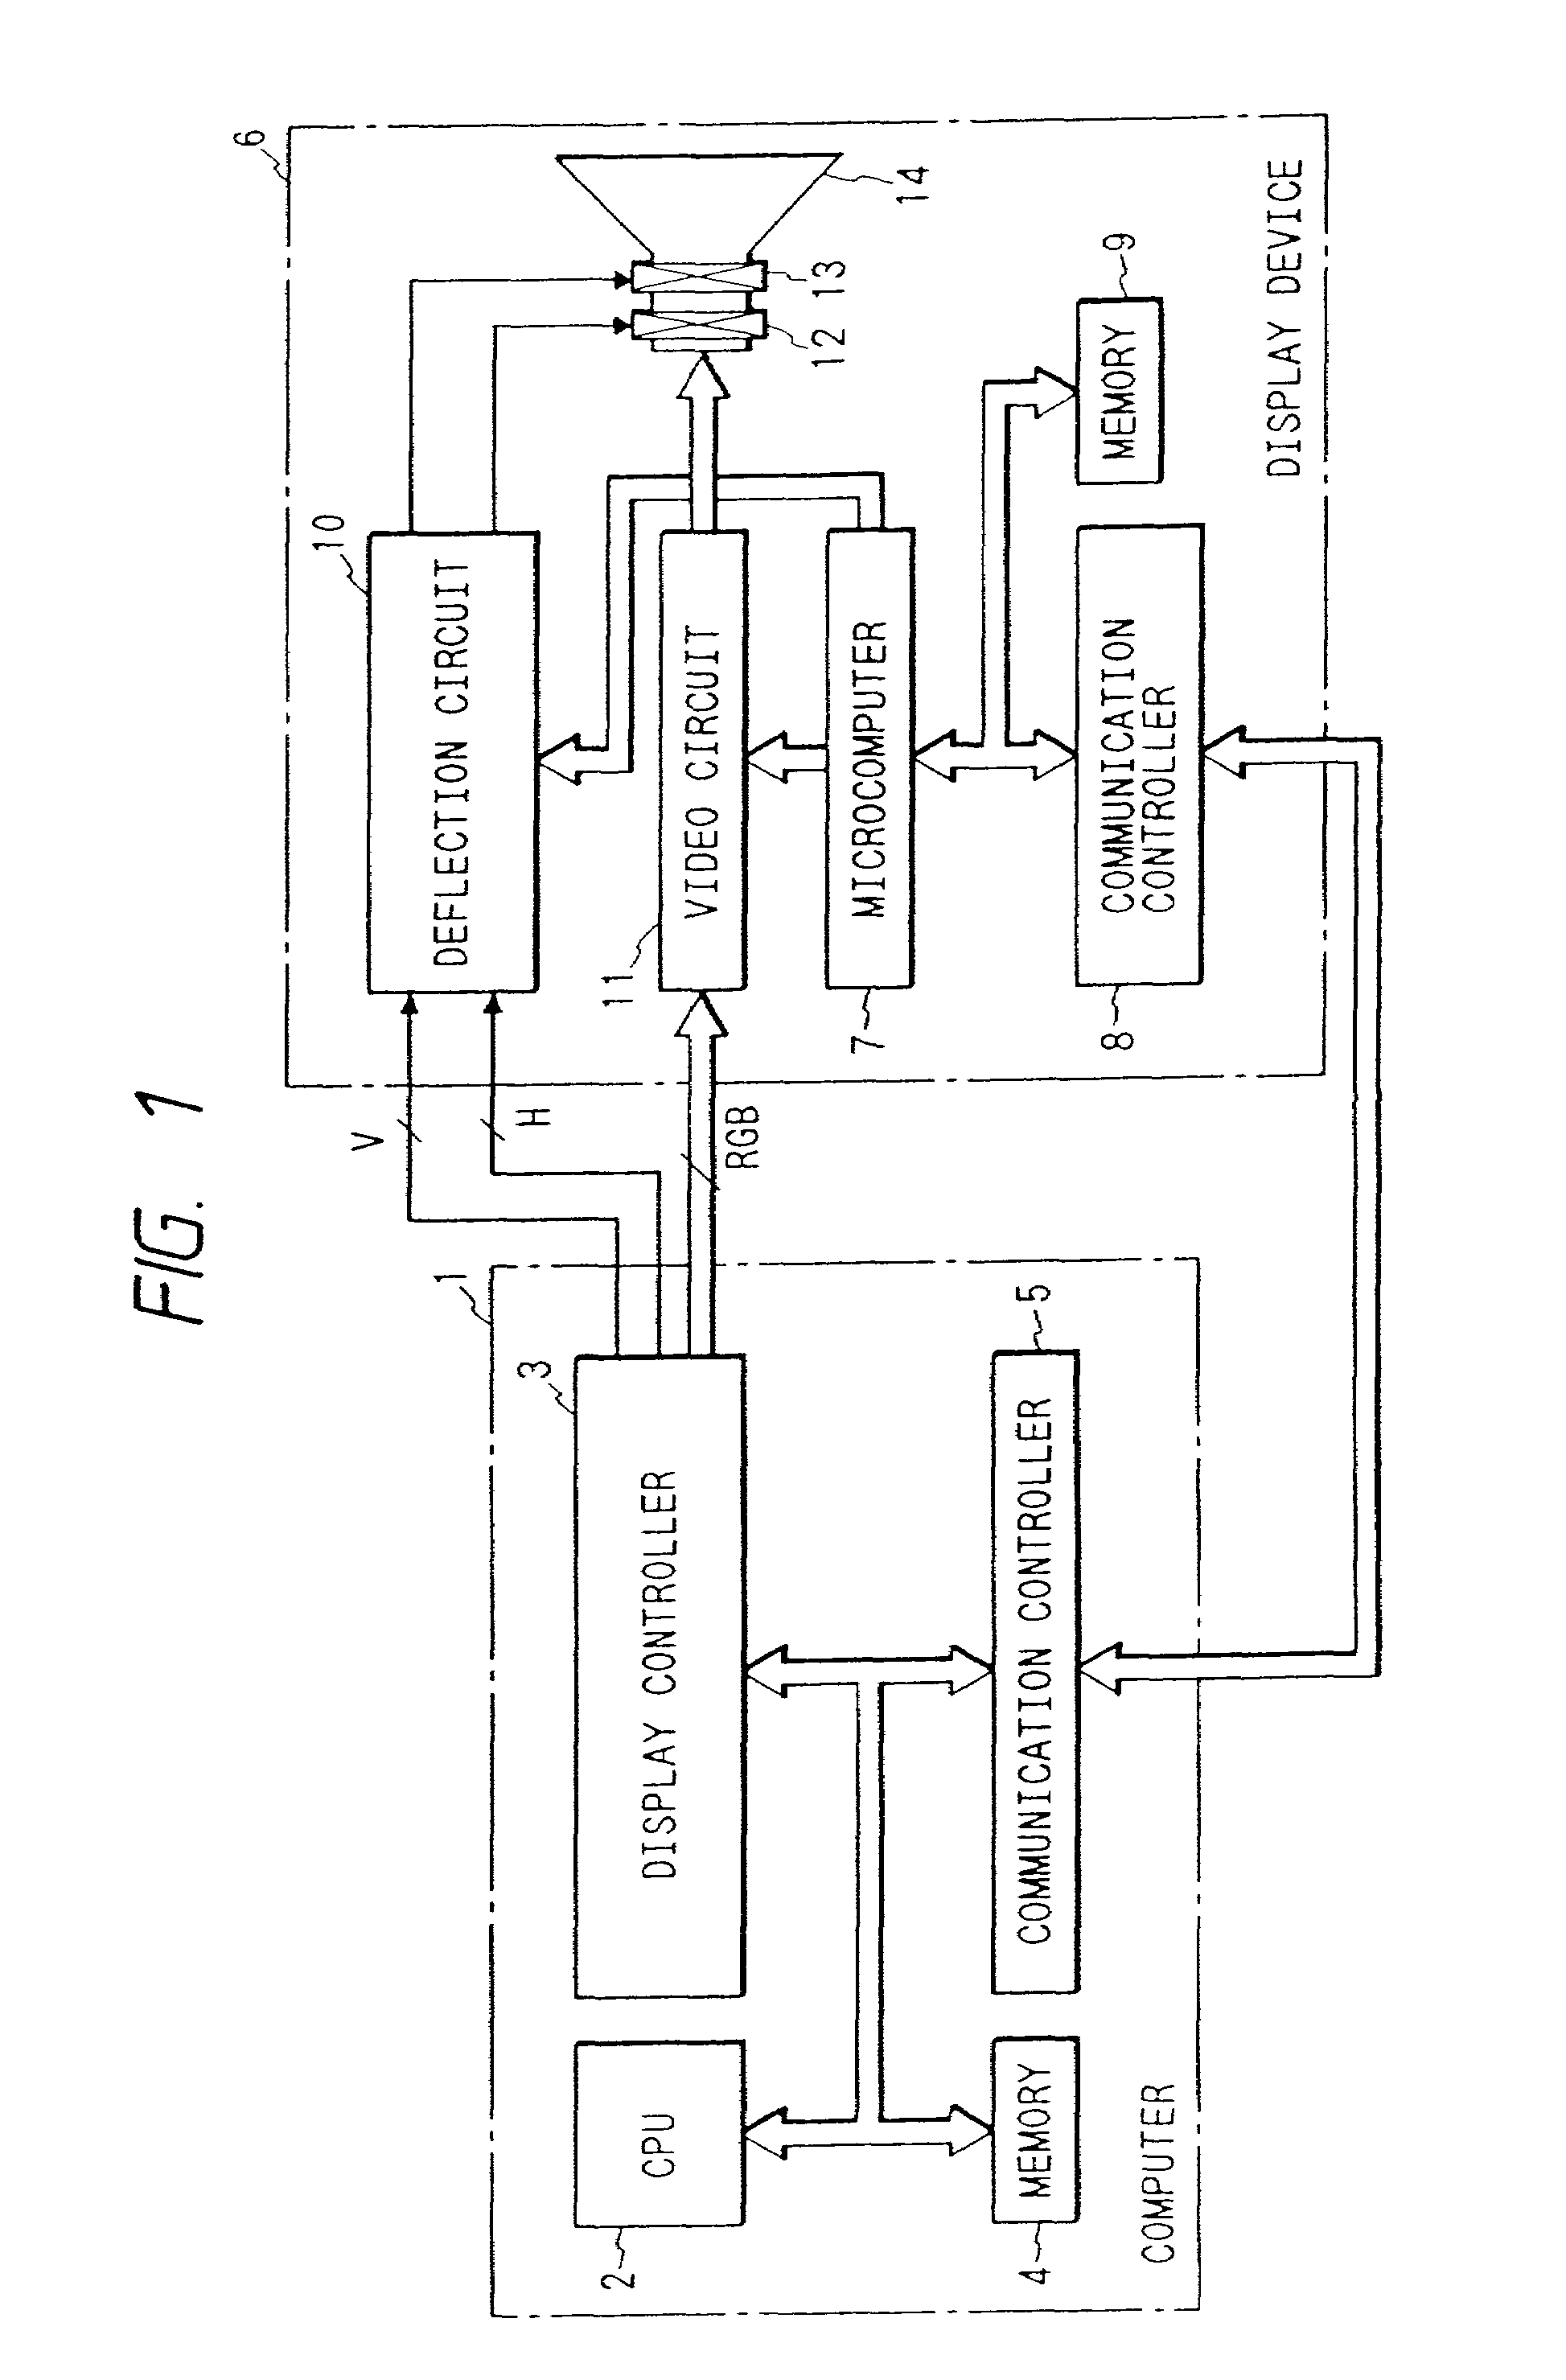 Display unit with communication controller and memory for storing identification number for identifying display unit